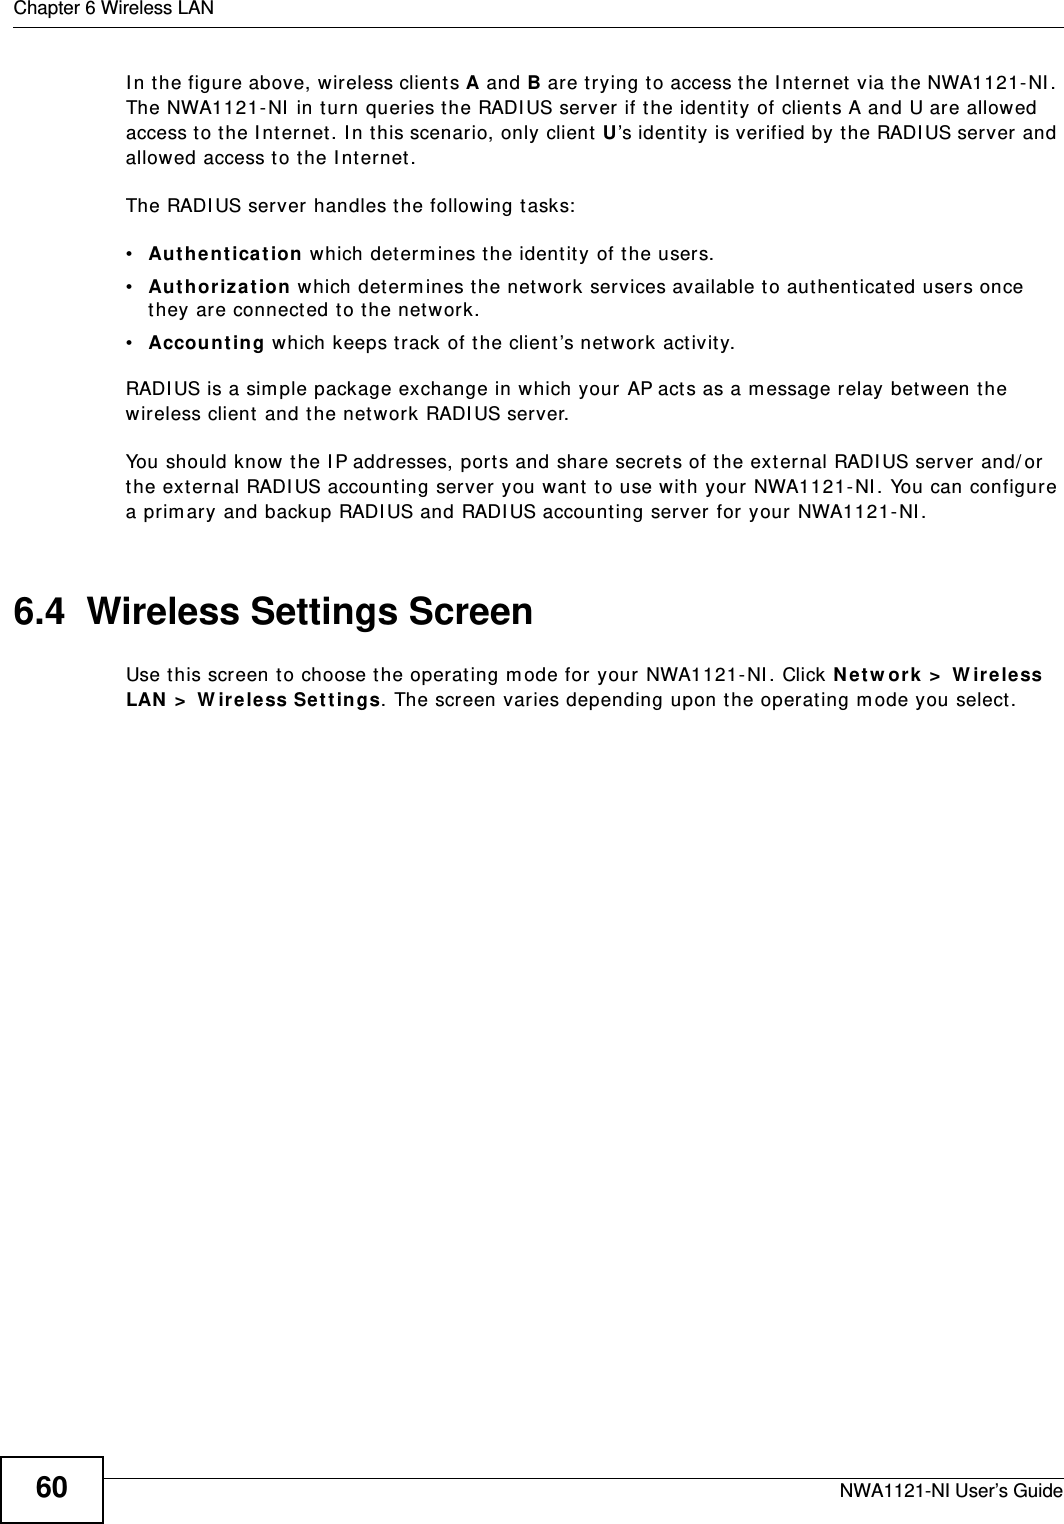 Chapter 6 Wireless LANNWA1121-NI User’s Guide60In the figure above, wireless clients A and B are trying to access the Internet via the NWA1121-NI. The NWA1121-NI in turn queries the RADIUS server if the identity of clients A and U are allowed access to the Internet. In this scenario, only client U’s identity is verified by the RADIUS server and allowed access to the Internet. The RADIUS server handles the following tasks:•Authentication which determines the identity of the users.•Authorization which determines the network services available to authenticated users once they are connected to the network.•Accounting which keeps track of the client’s network activity. RADIUS is a simple package exchange in which your AP acts as a message relay between the wireless client and the network RADIUS server. You should know the IP addresses, ports and share secrets of the external RADIUS server and/or the external RADIUS accounting server you want to use with your NWA1121-NI. You can configure a primary and backup RADIUS and RADIUS accounting server for your NWA1121-NI.6.4  Wireless Settings ScreenUse this screen to choose the operating mode for your NWA1121-NI. Click Network &gt; Wireless LAN &gt; Wireless Settings. The screen varies depending upon the operating mode you select.